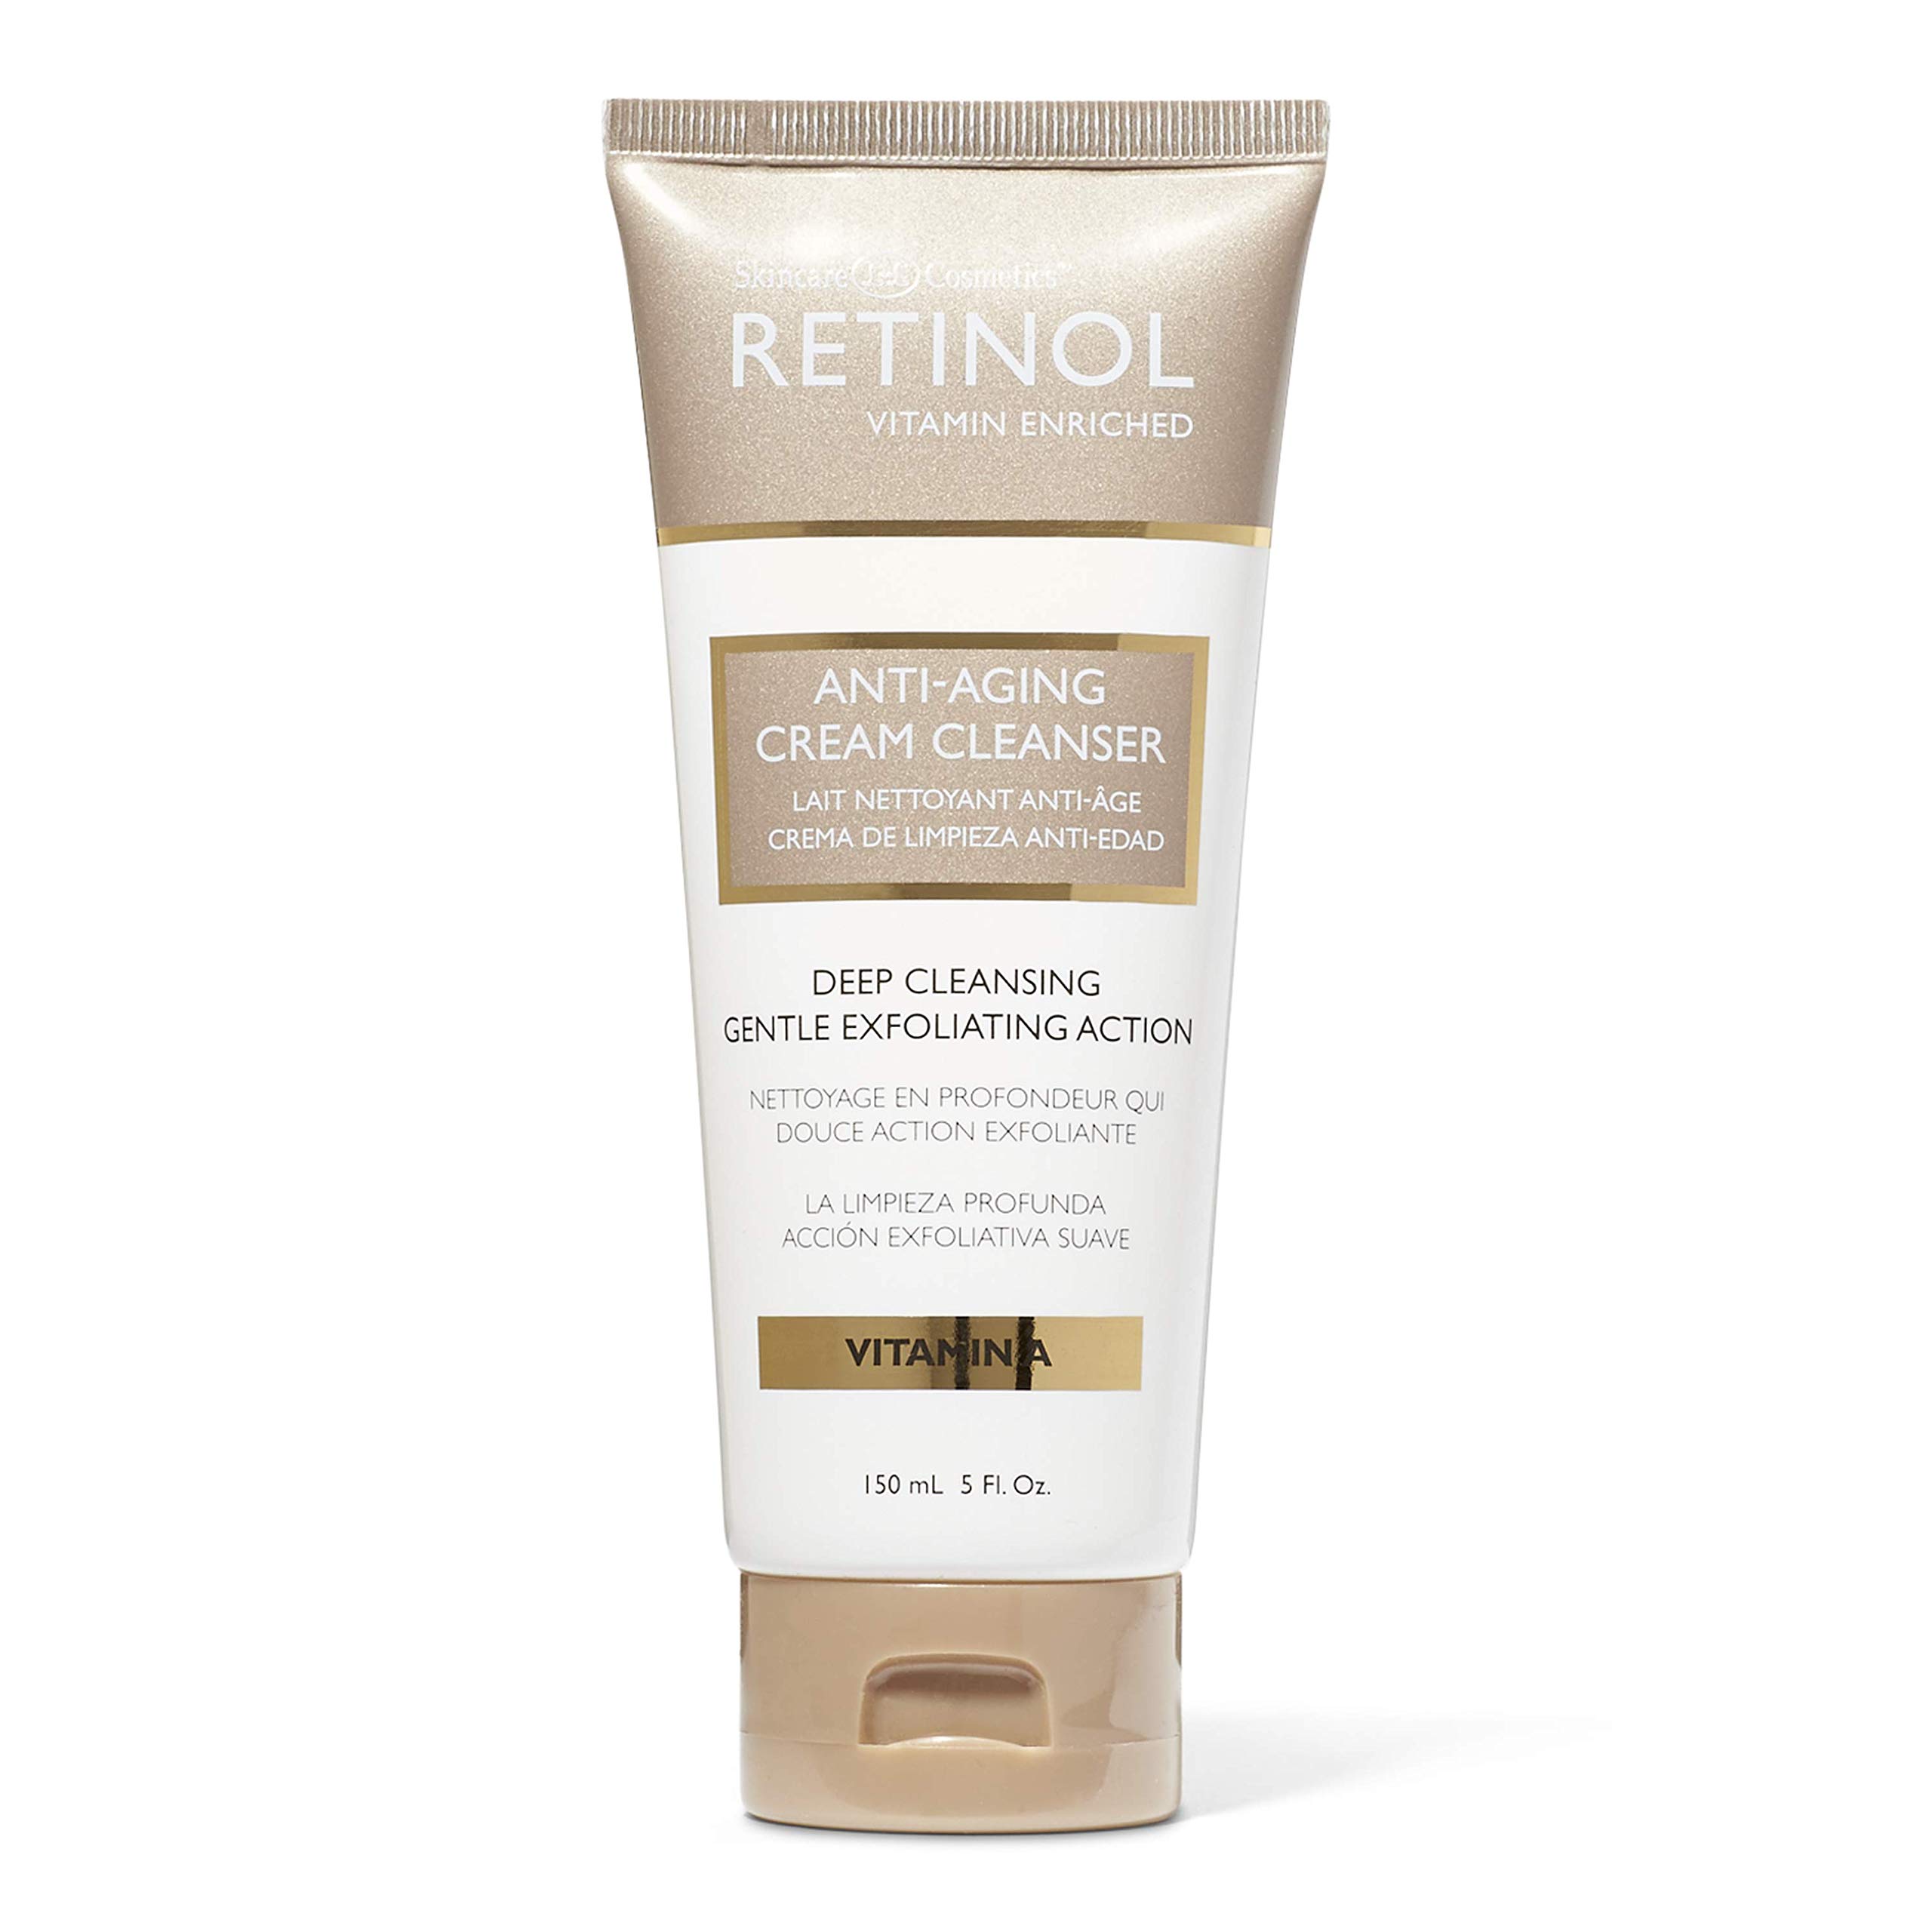 Retinol Cream Cleanser Anti-Aging – 5oz – Daily Deep Cleansing Facial Wash Improves Skin Texture, Moisturizes, And Exfoliates for Softer Face – Renewing Vitamin A Minimizes Wrinkles and Fine Lines - image 1 of 5